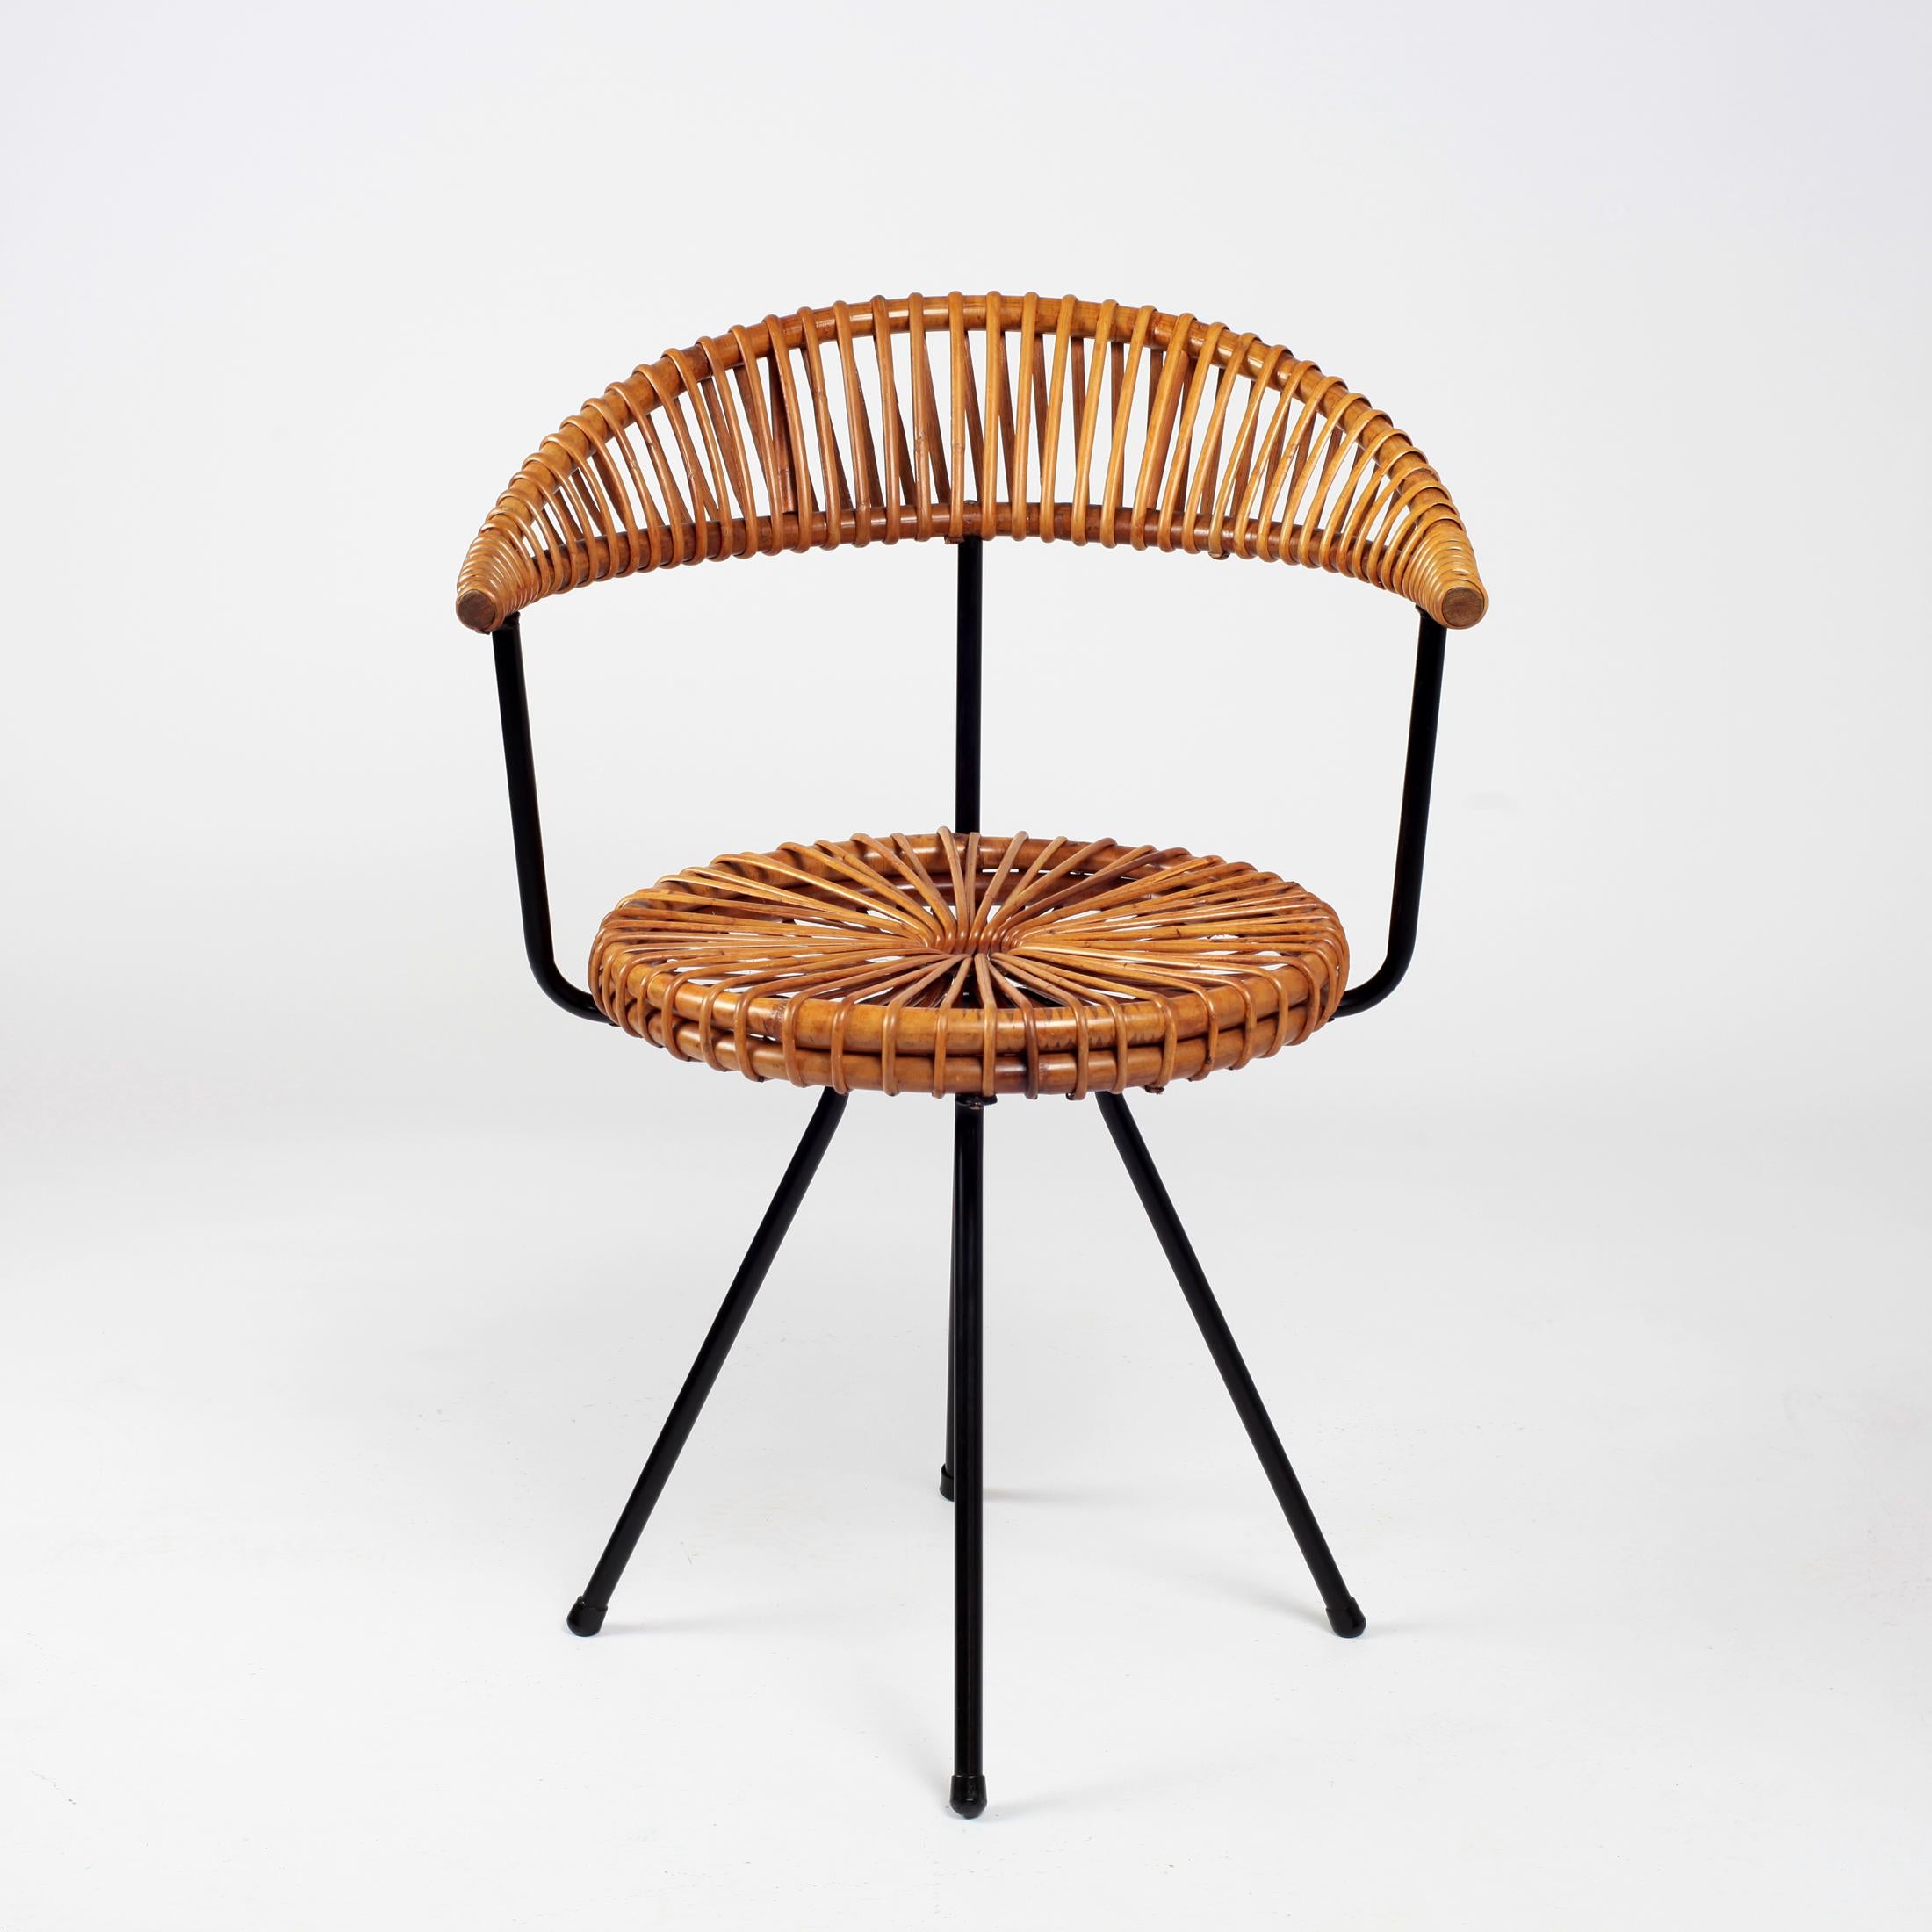 Elegant rattan chair designed by Dirk Van Sliedrecht for Jonkers Noordwolde in the 1950s in the Netherlands. Rattan seat and backrest and black metal structure.
The chair is in a very good vintage condition.

 